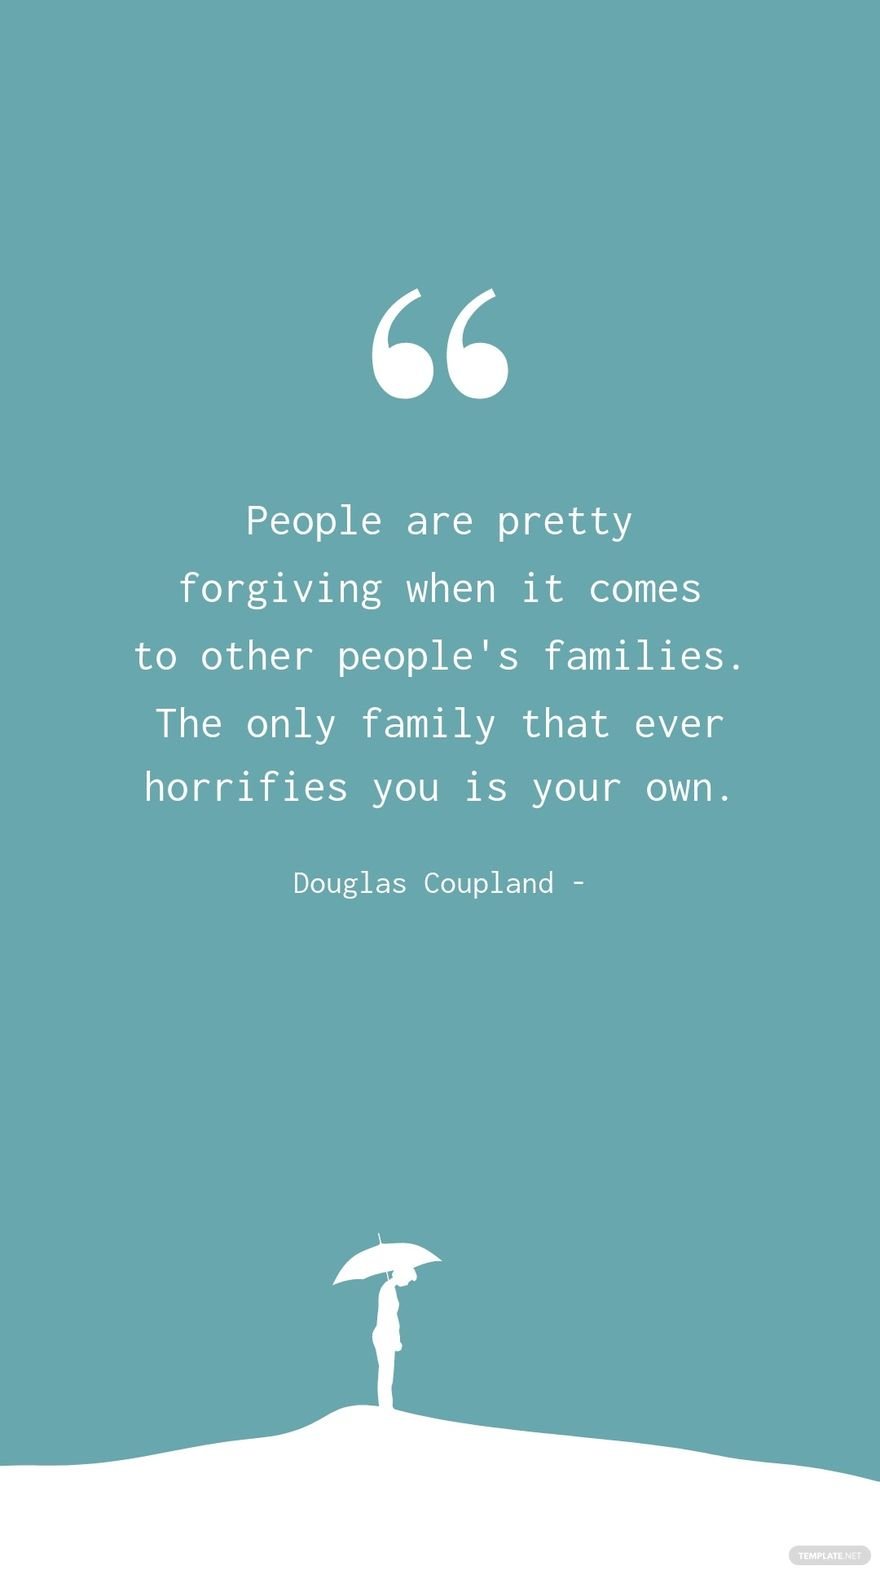 Free Douglas Coupland - People are pretty forgiving when it comes to other people's families. The only family that ever horrifies you is your own. in JPG